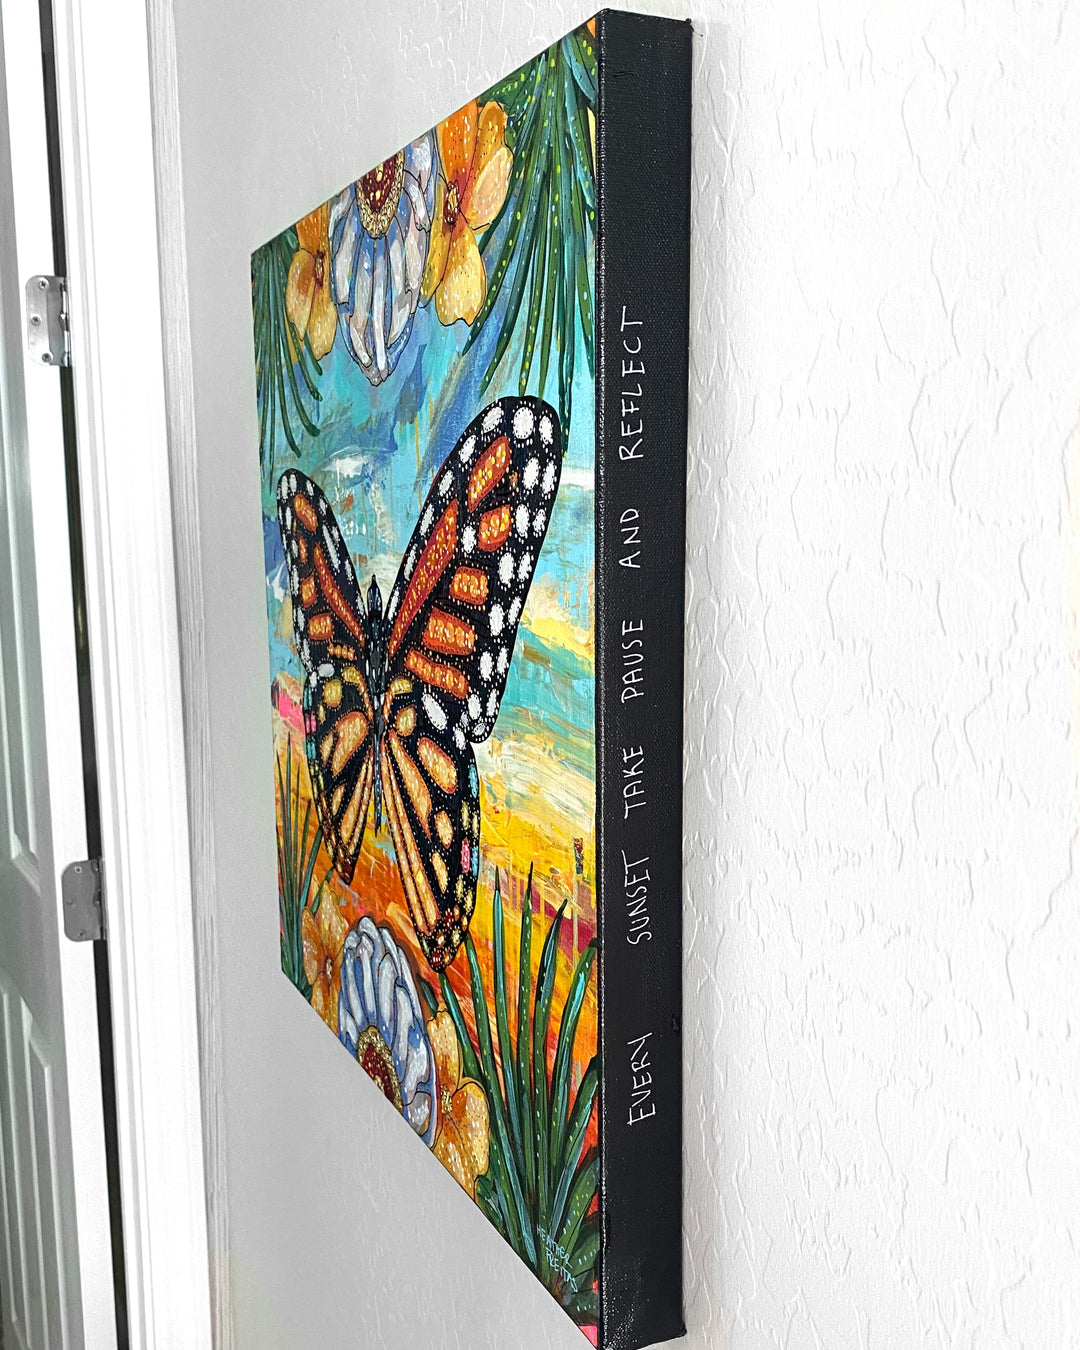 Tropical Monarch Bloom Butterfly - Heather Freitas 